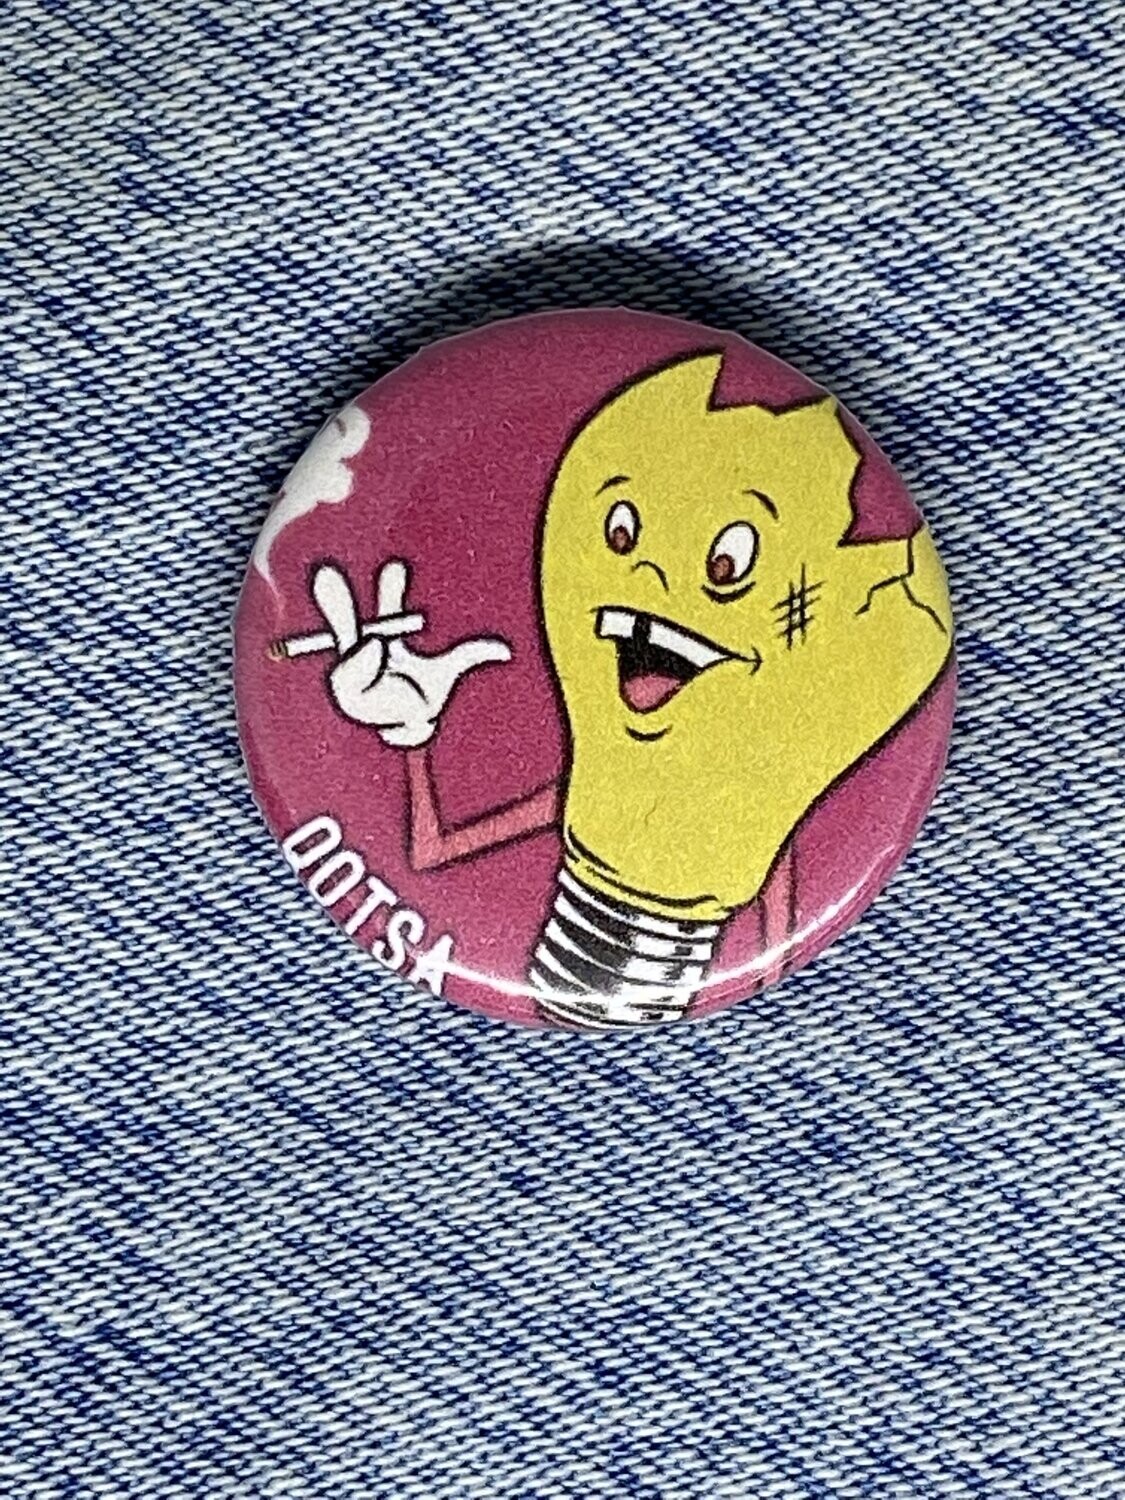 Queens of the Stone Age Badge